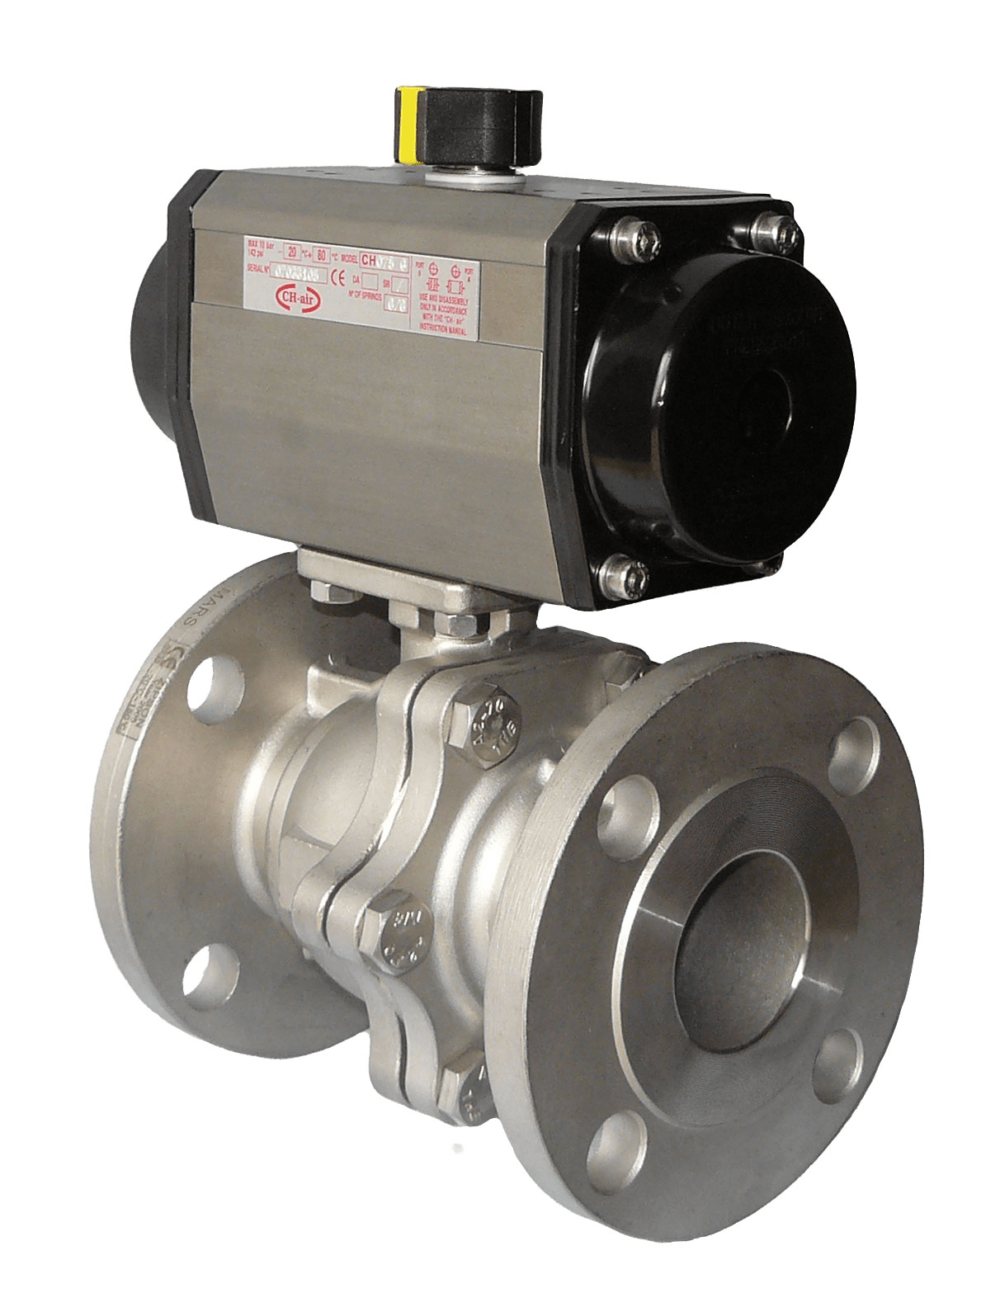 Flanged Stainless Steel Ball Valve with CH-air Pneumatic Actuator